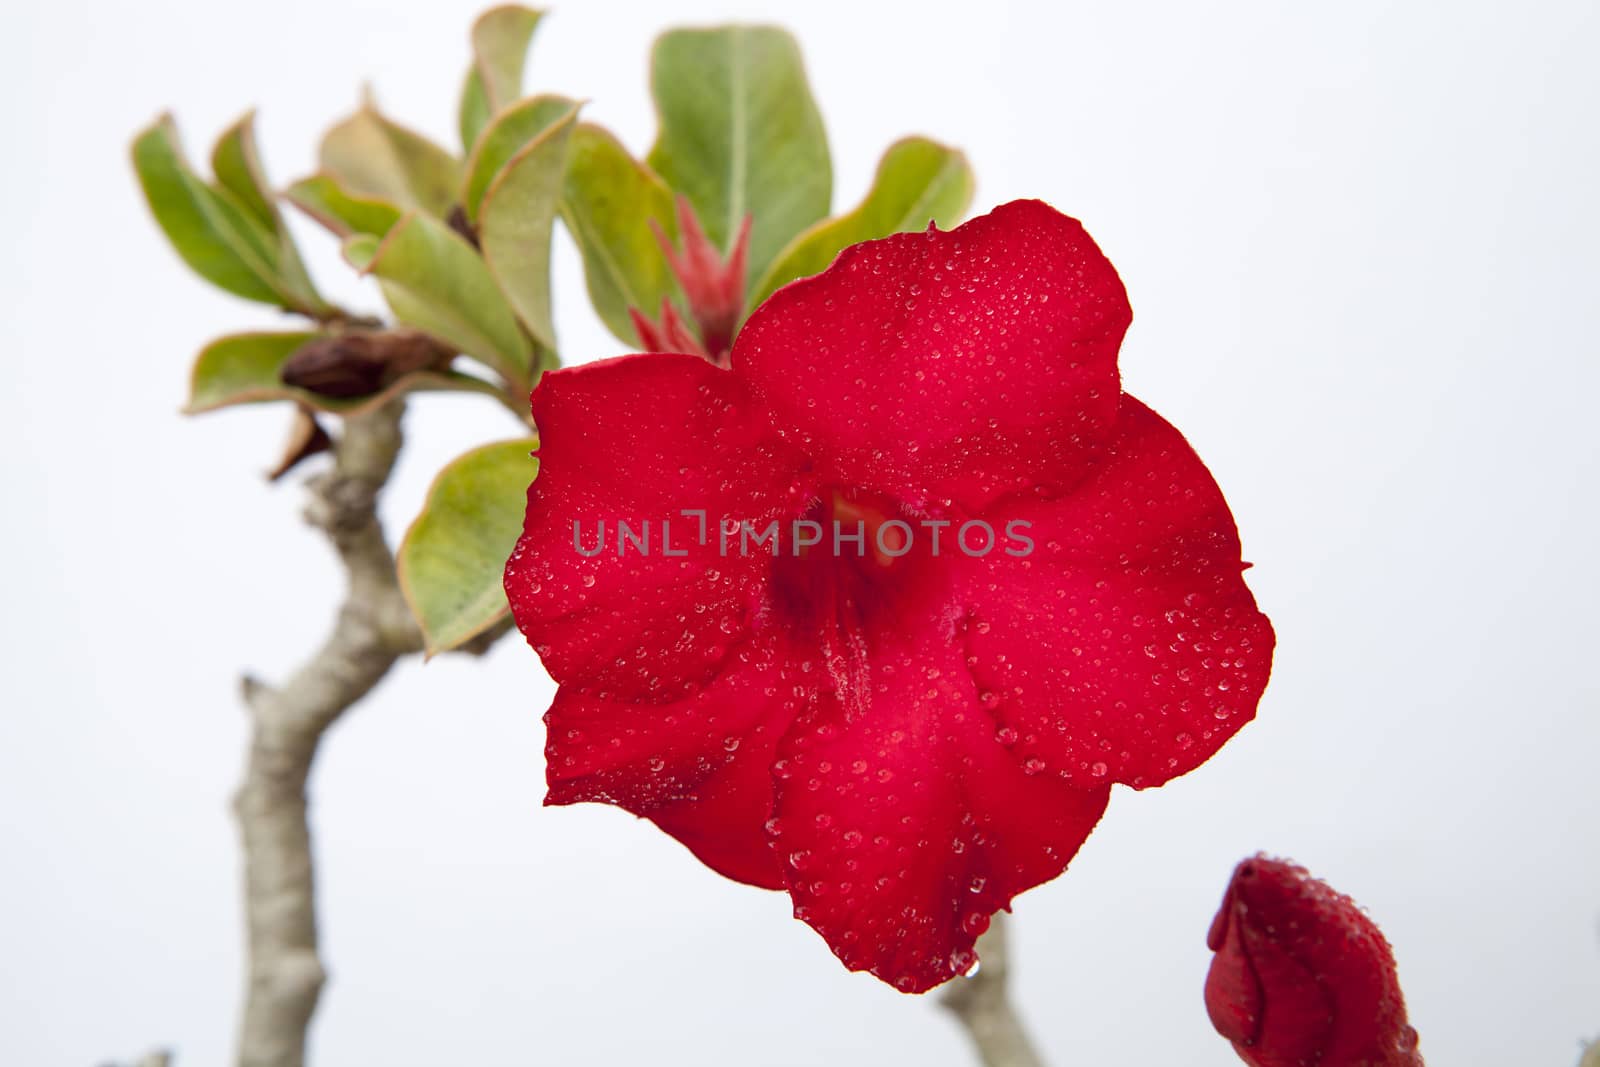 Impala lily or desert rose by Chattranusorn09